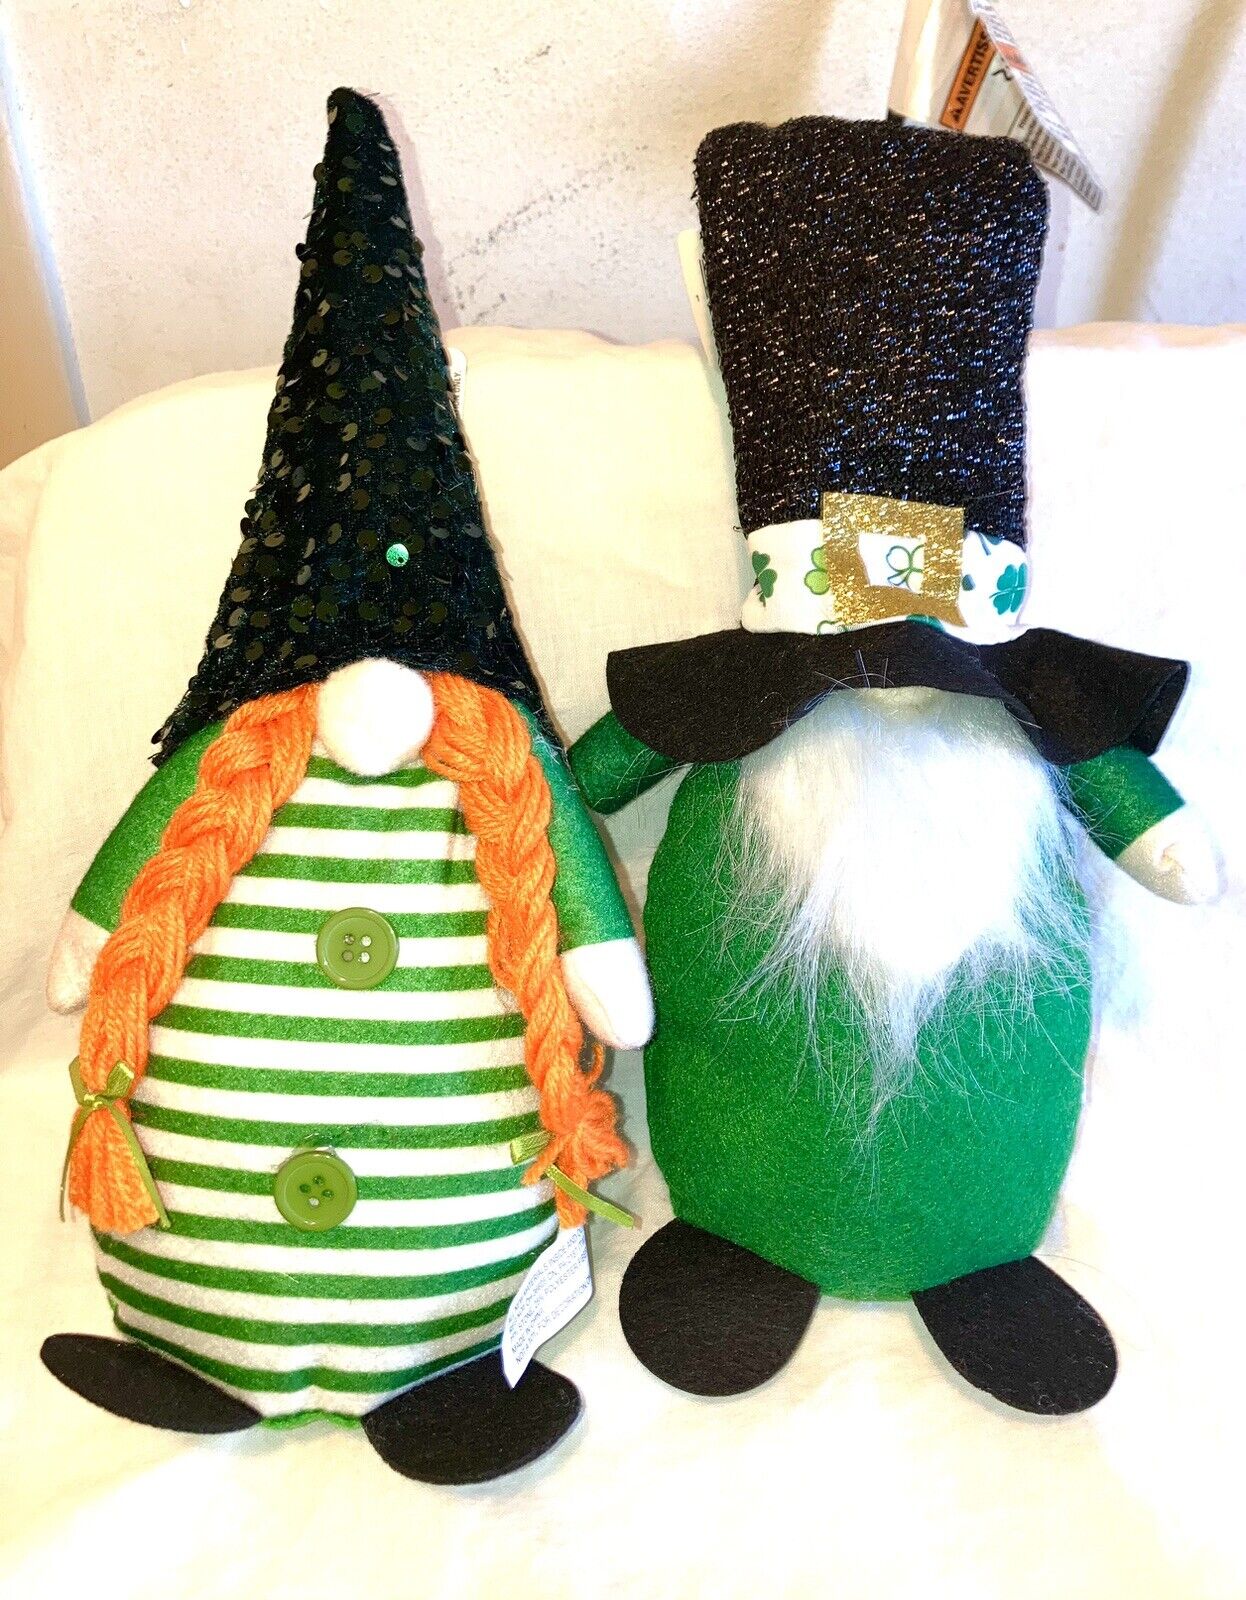 2 Gnomes Him and Hers Sequins Green orange 14